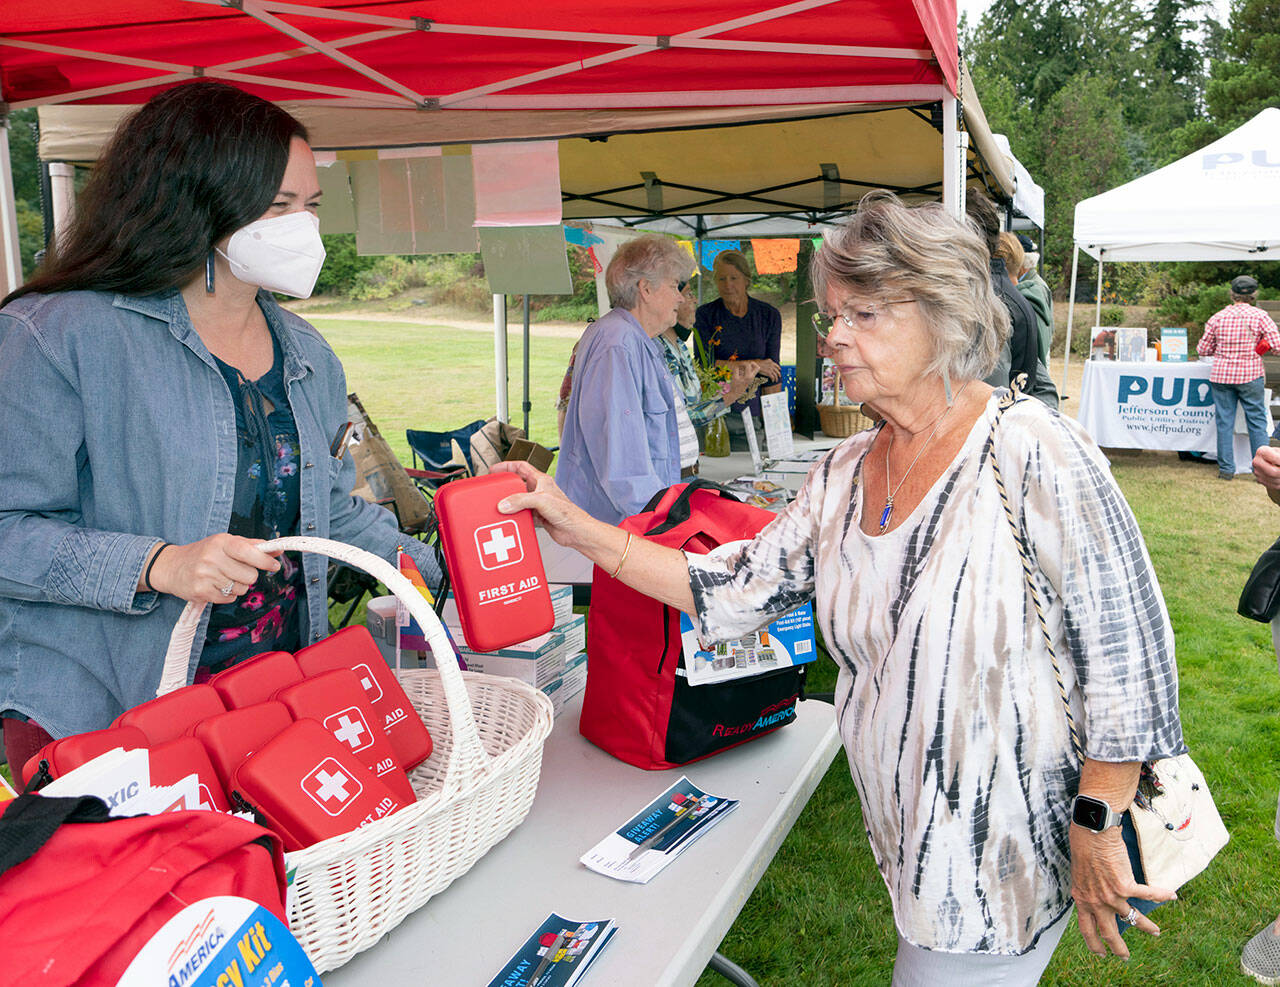 Carol Riley of Port Ludlow receives a free first aid kit from Apple Martine, director of Jefferson County Public Health, during the emergency preparedness demonstrations at HJ Carroll Park in Chimacum on Saturday. (Steve Mullensky/for Peninsula Daily News)